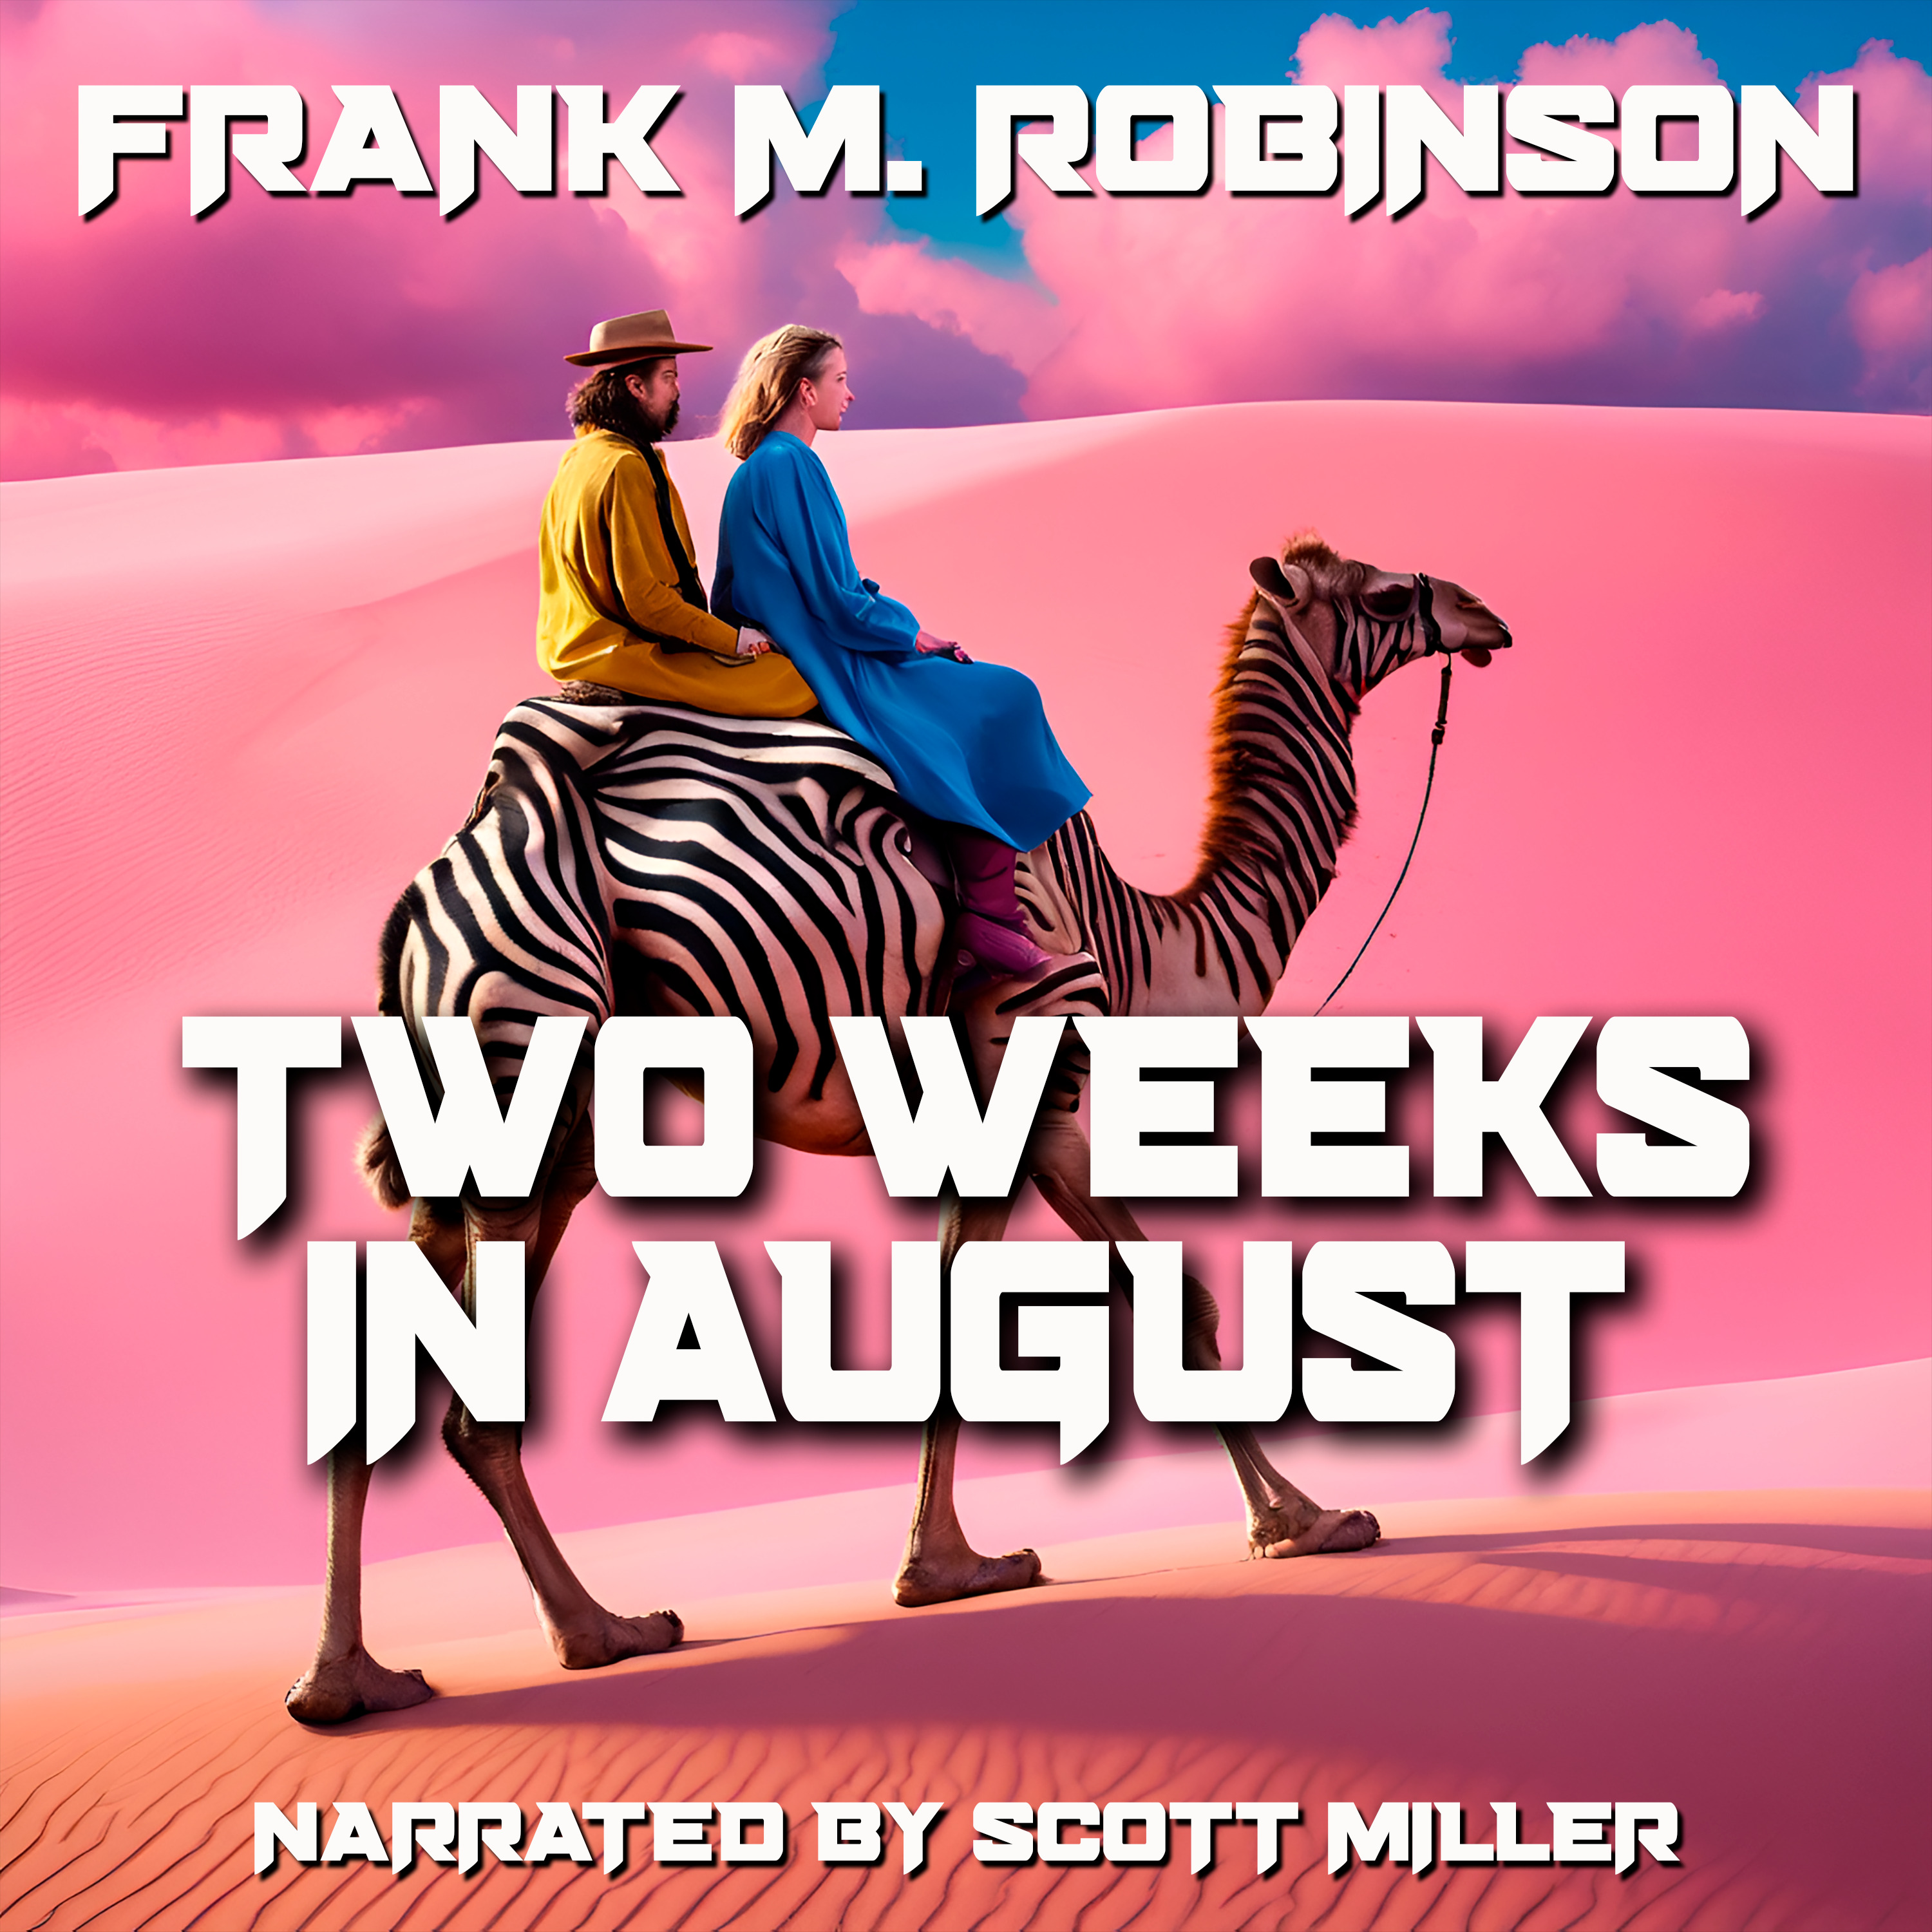 Two Weeks in August by Frank M. Robinson - Frank M. Robinson Science Fiction Short Stories